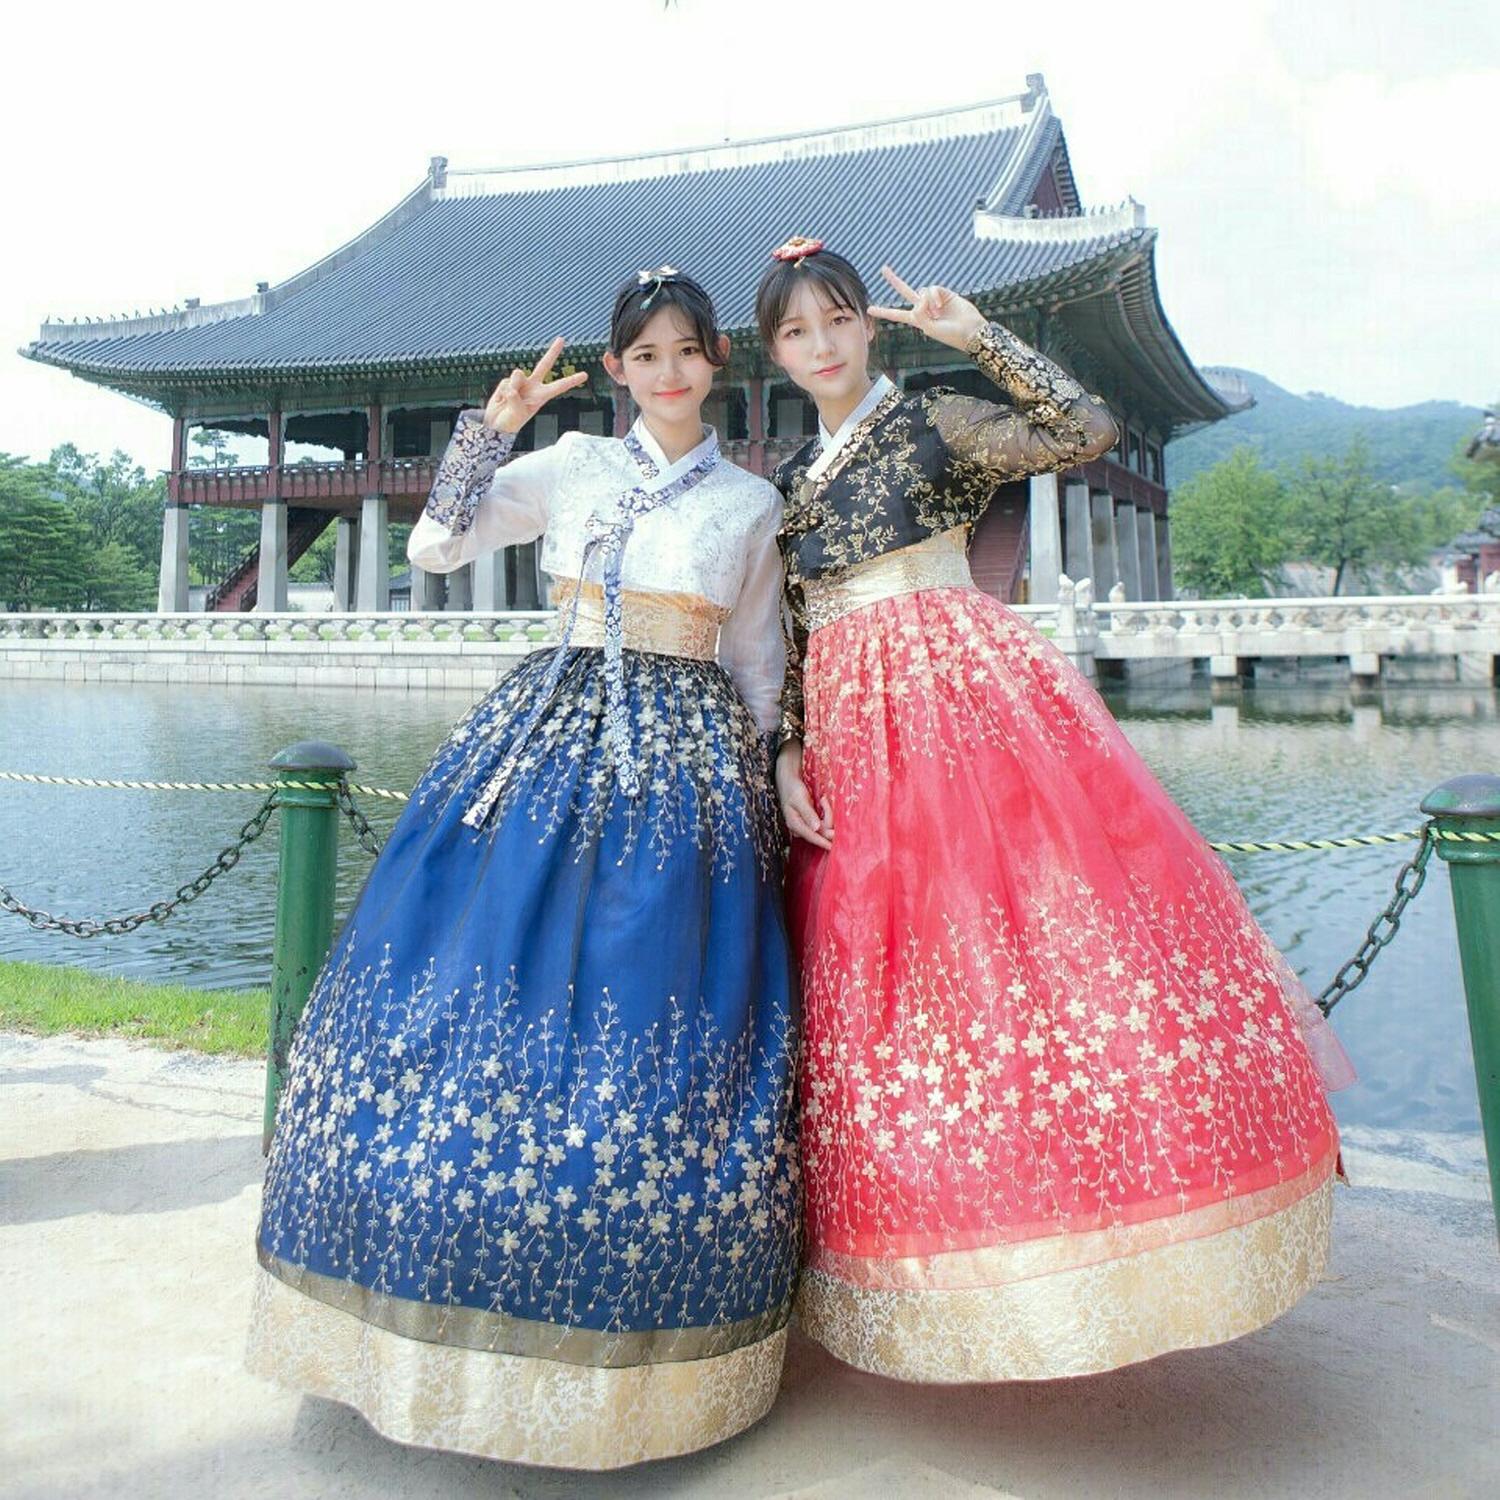 Smiling women in traditional Korean dress stands in front of temple at Gyeongbokgung Palace, with sky and trees in background.